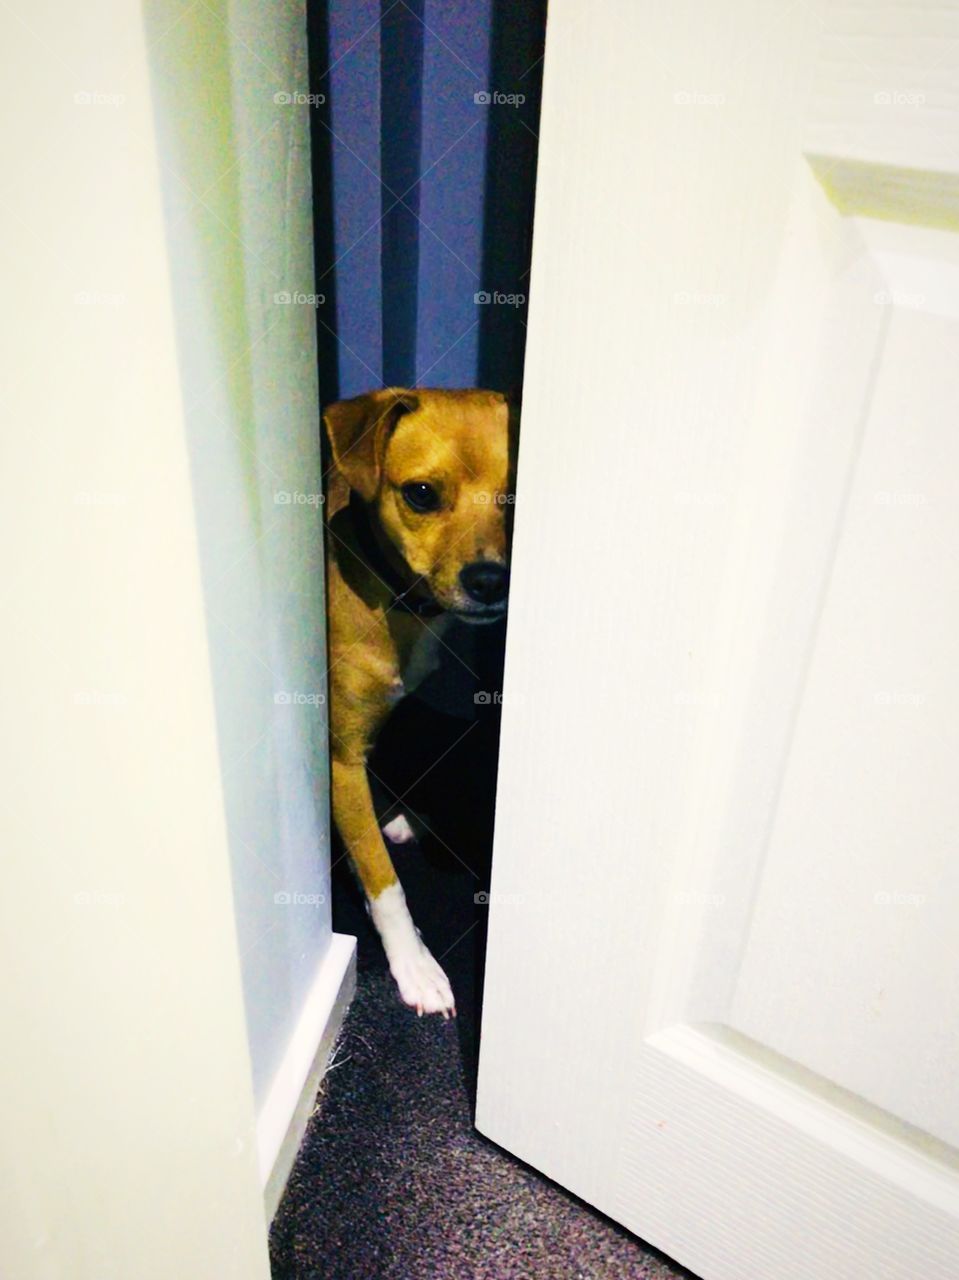 Little boo peaking through the door, Street dog, white socks, baby boo, our baby!